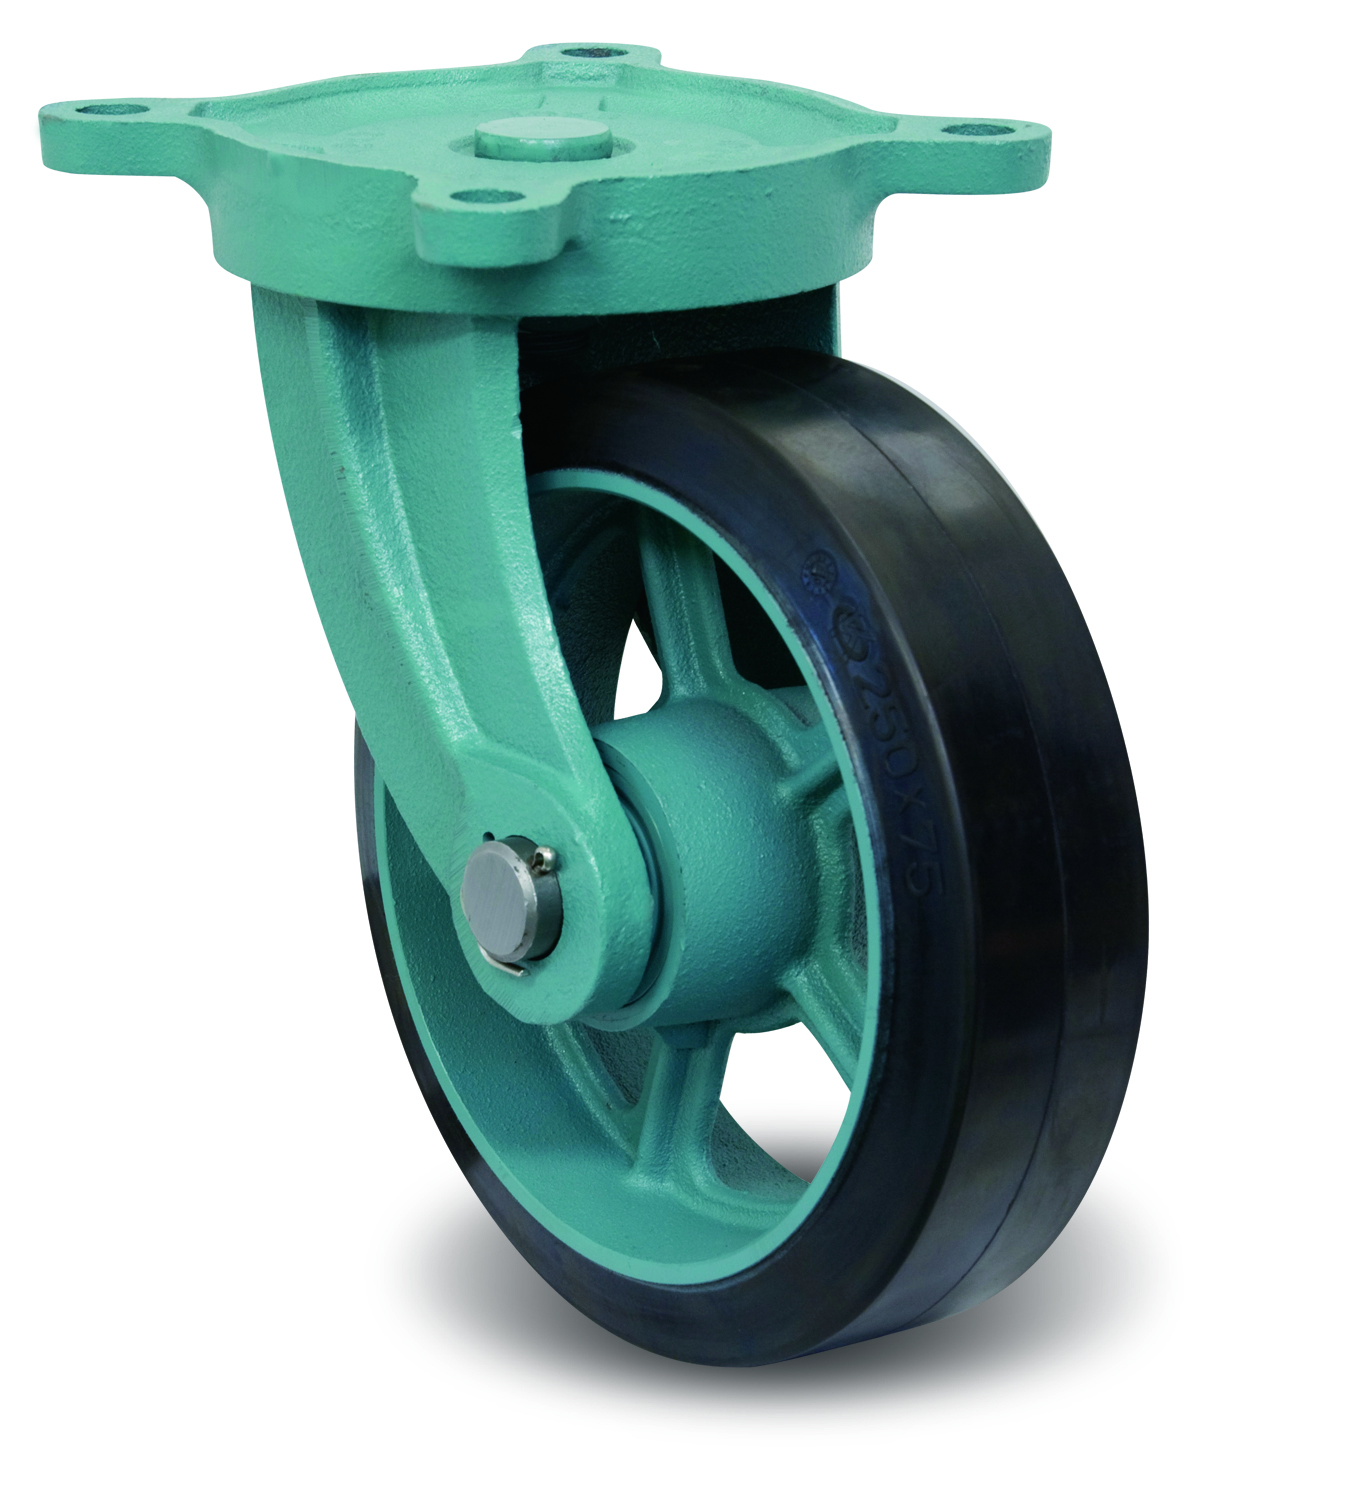 Casters - Rubber with Ductile Steel Swivel Plate, MG-O Series with Bracket, E/MG-O Series.